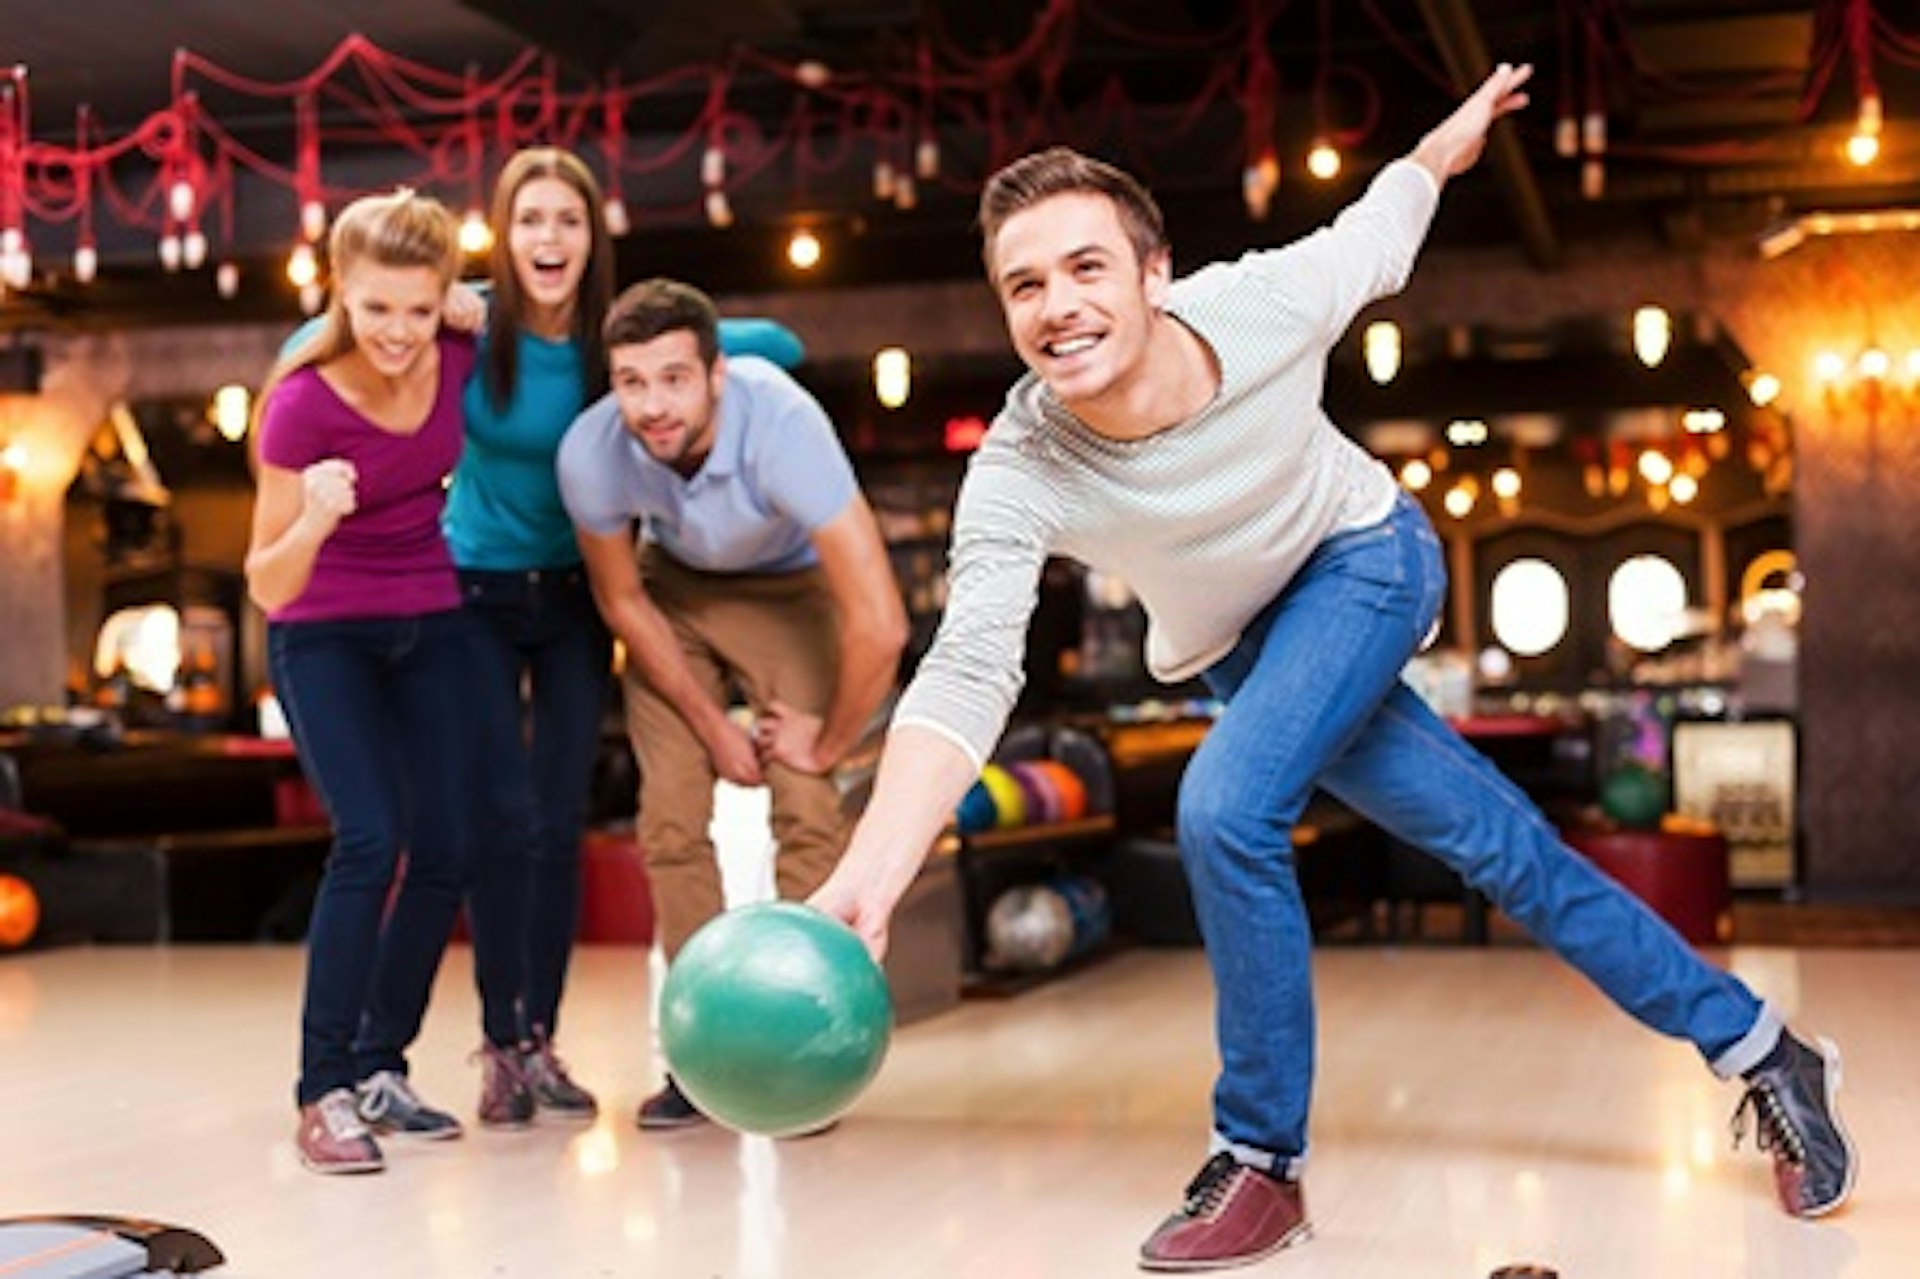 Two Games of Bowling with Meal and Drinks for Two at Disco Bowl 1